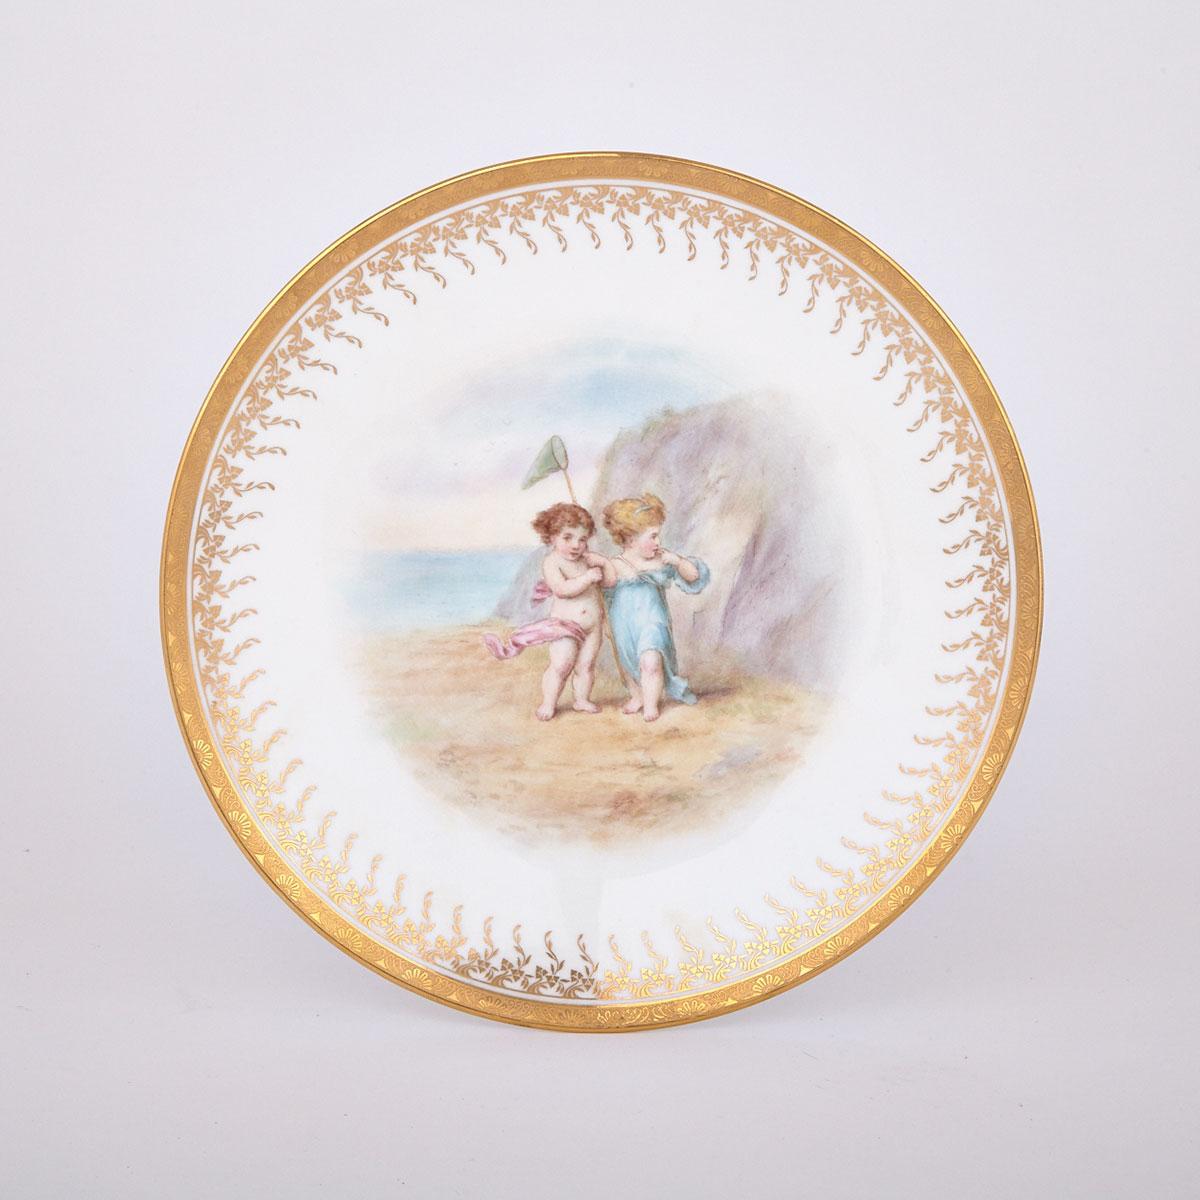 Minton Ivory Ground Cabinet Plate, 1889